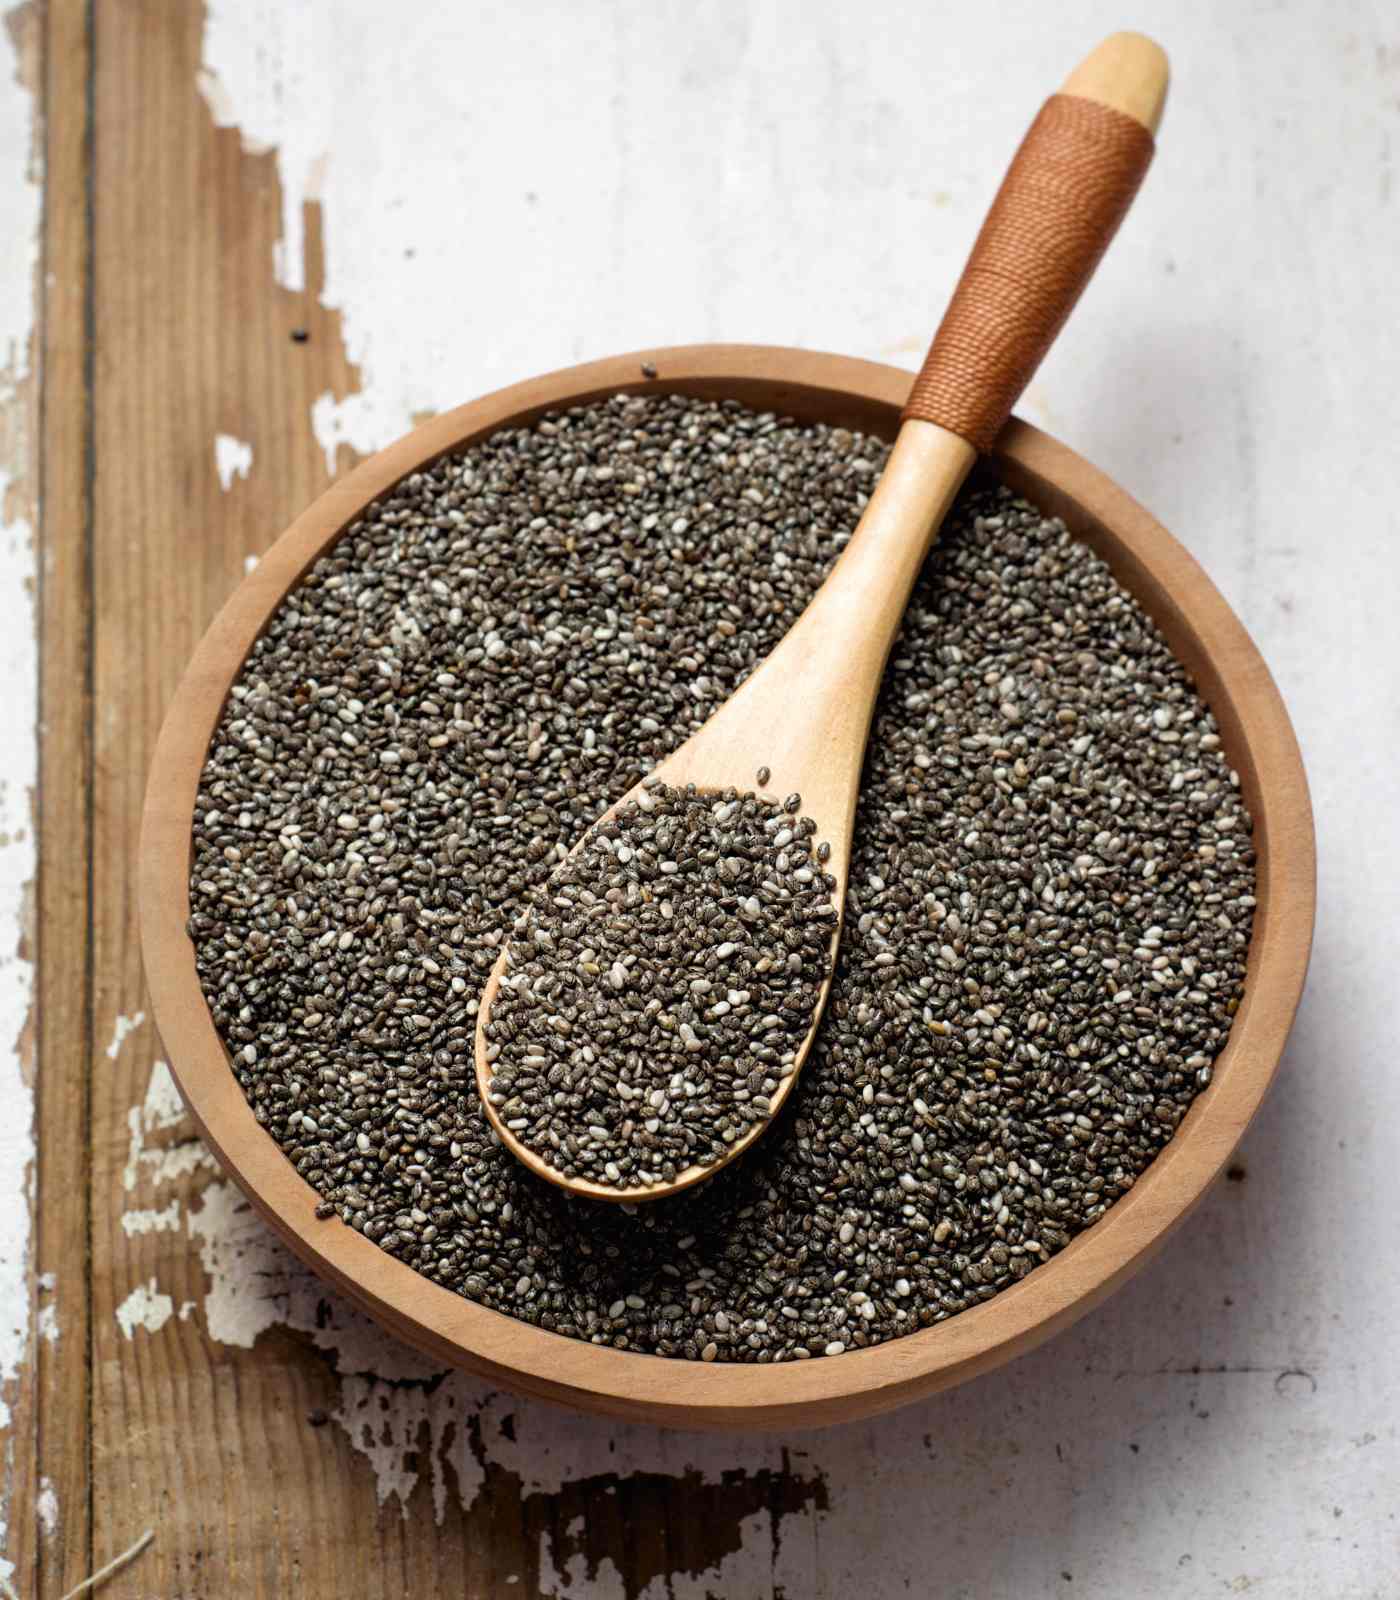 Chia Seeds available to purchase at ChiaBia.com